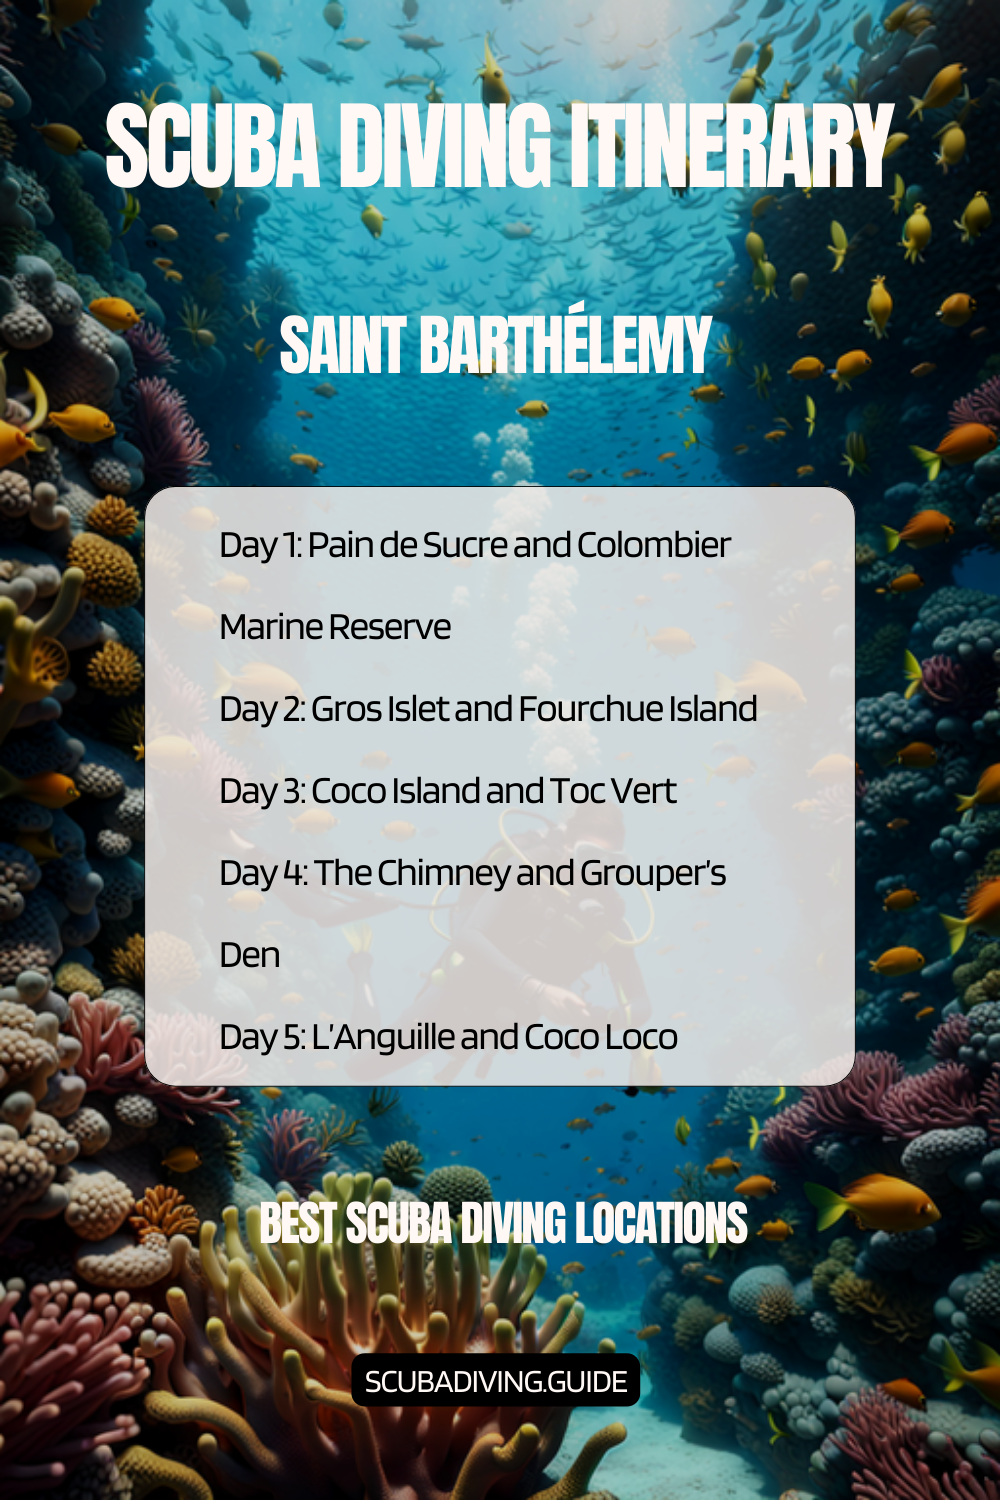 Saint Barthélemy Recommended Scuba Diving Itinerary